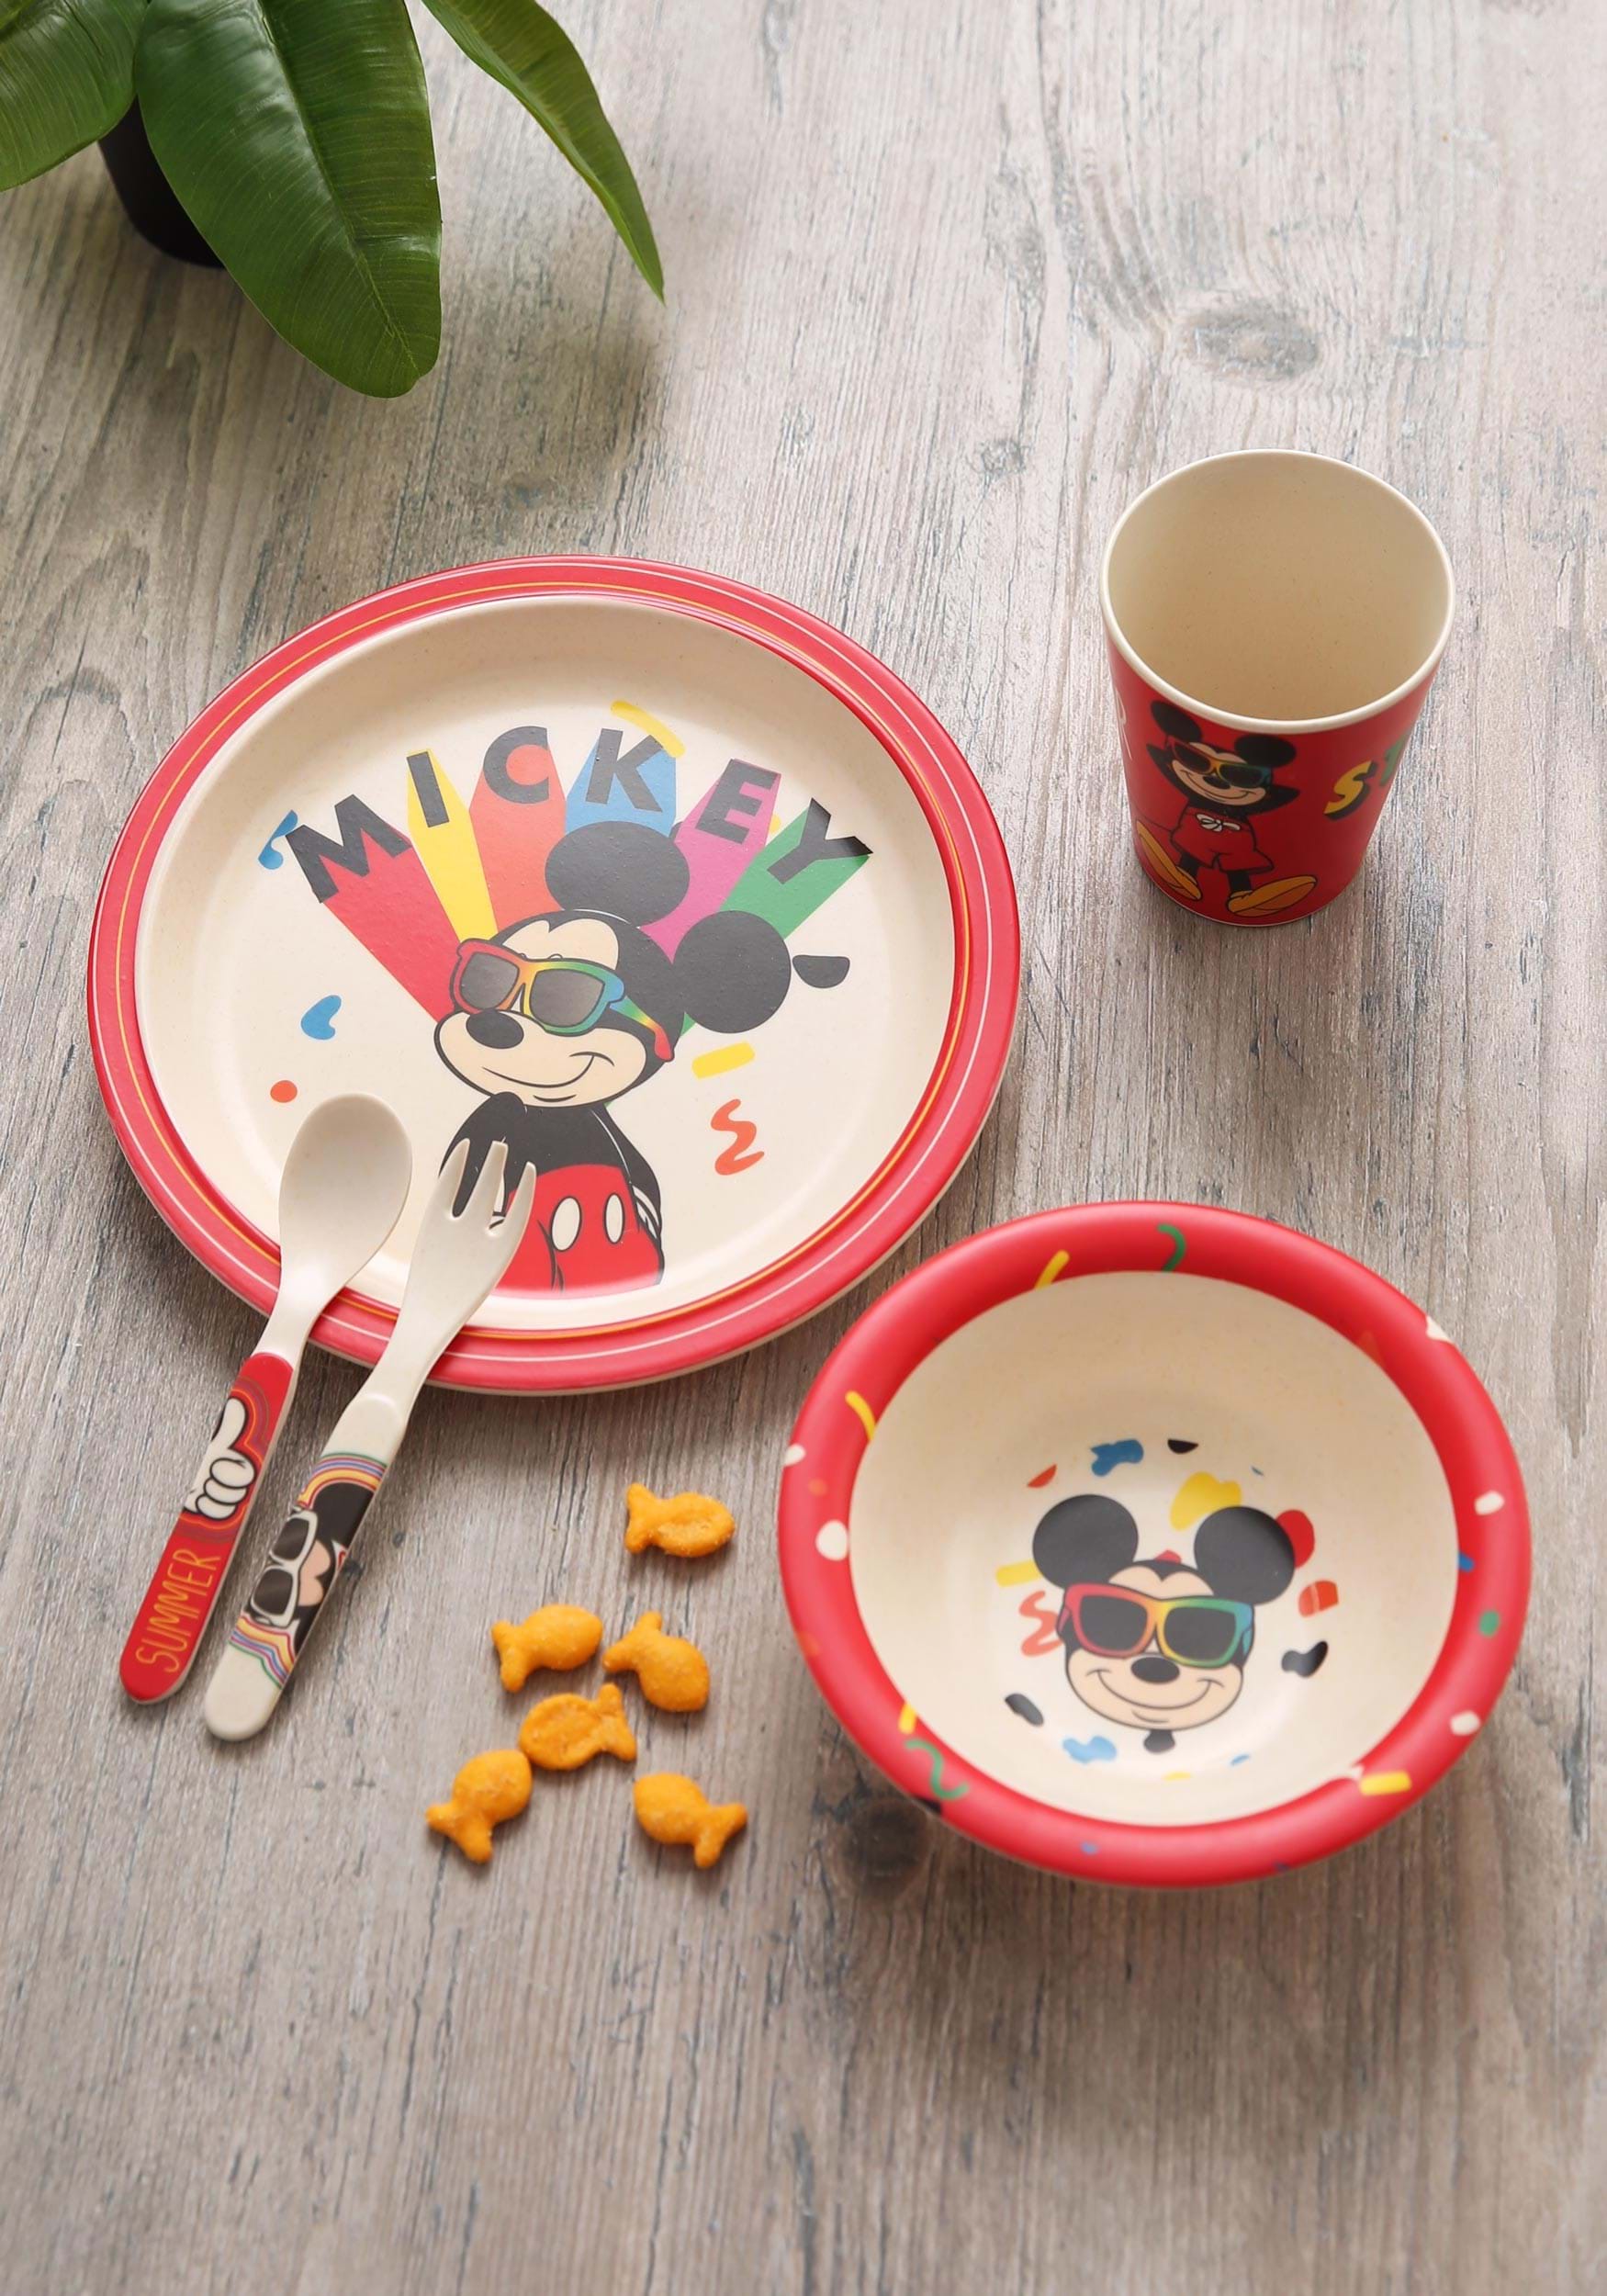 https://images.fun.com/products/68116/1-1/mickey-shades-5pc-dinnerware-set-update.jpg